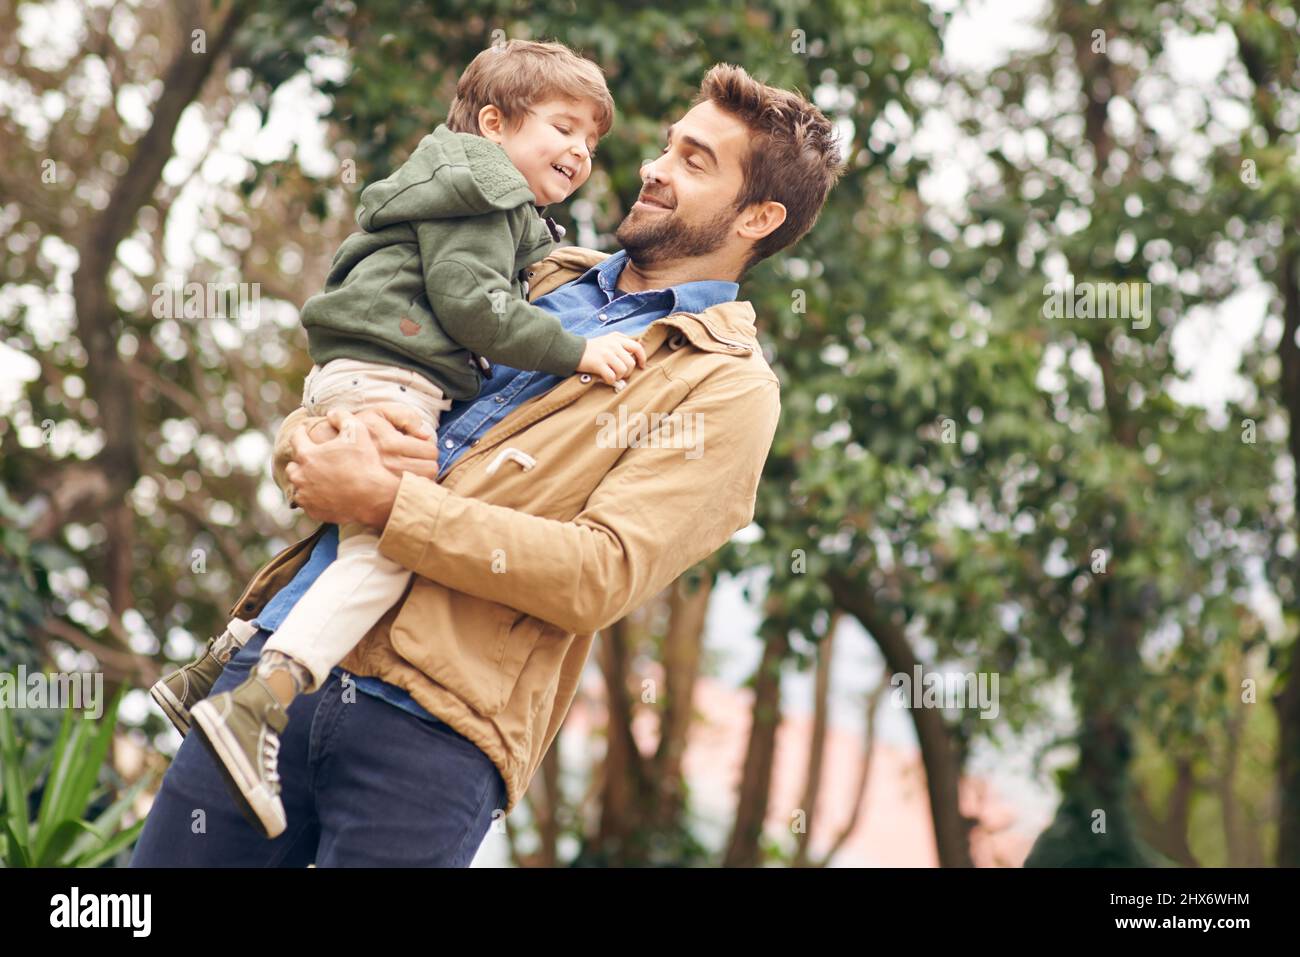 Boys day out. Shot of a father and son enjoying a day outdoors. Stock Photo